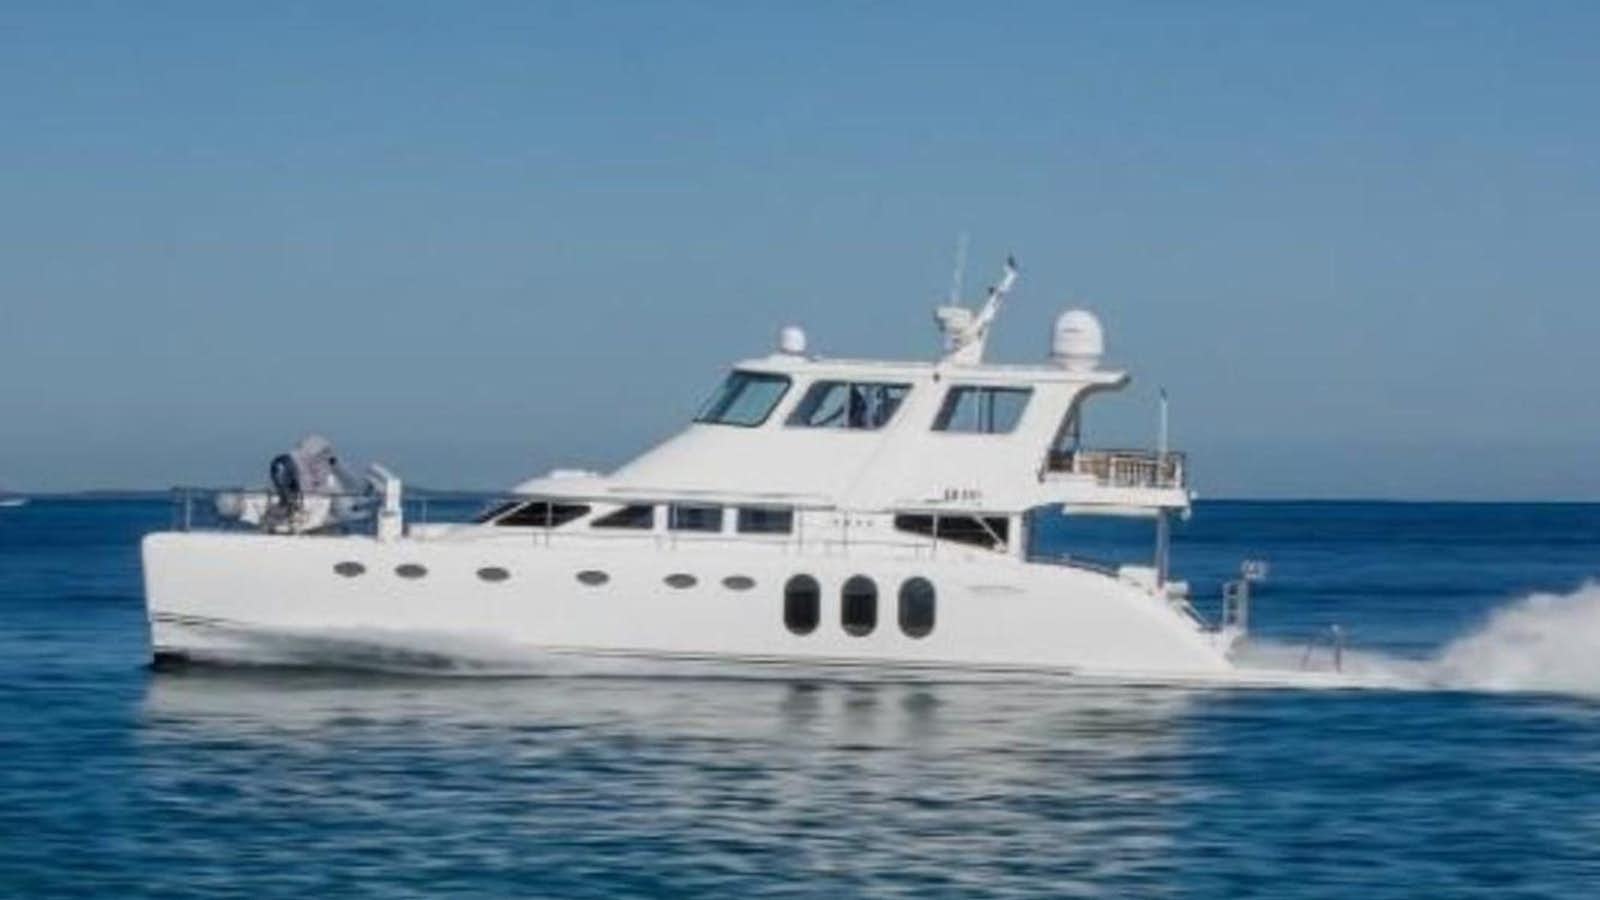 Power play
Yacht for Sale